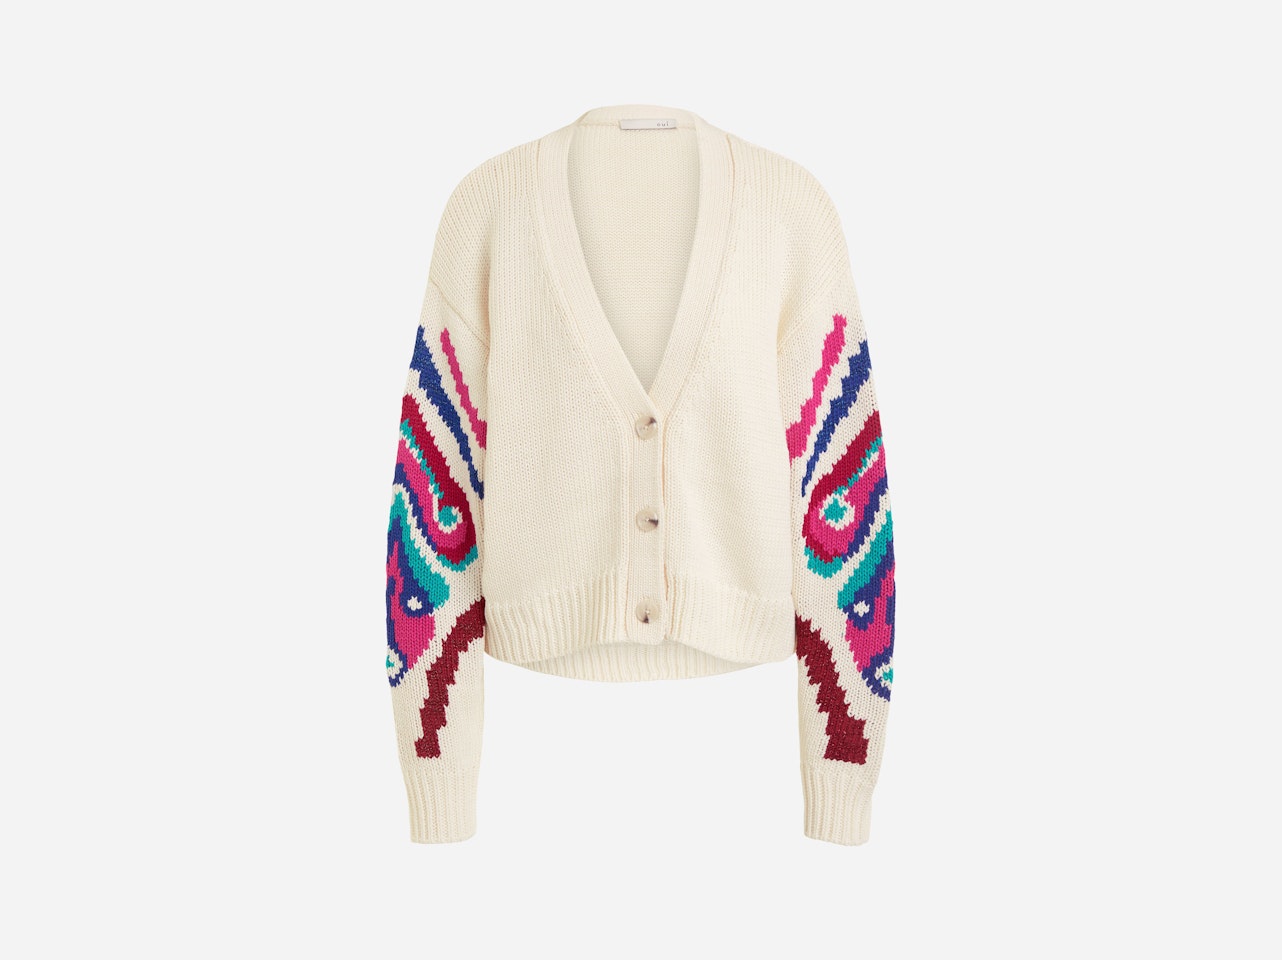 Cardigan with patterned sleeves